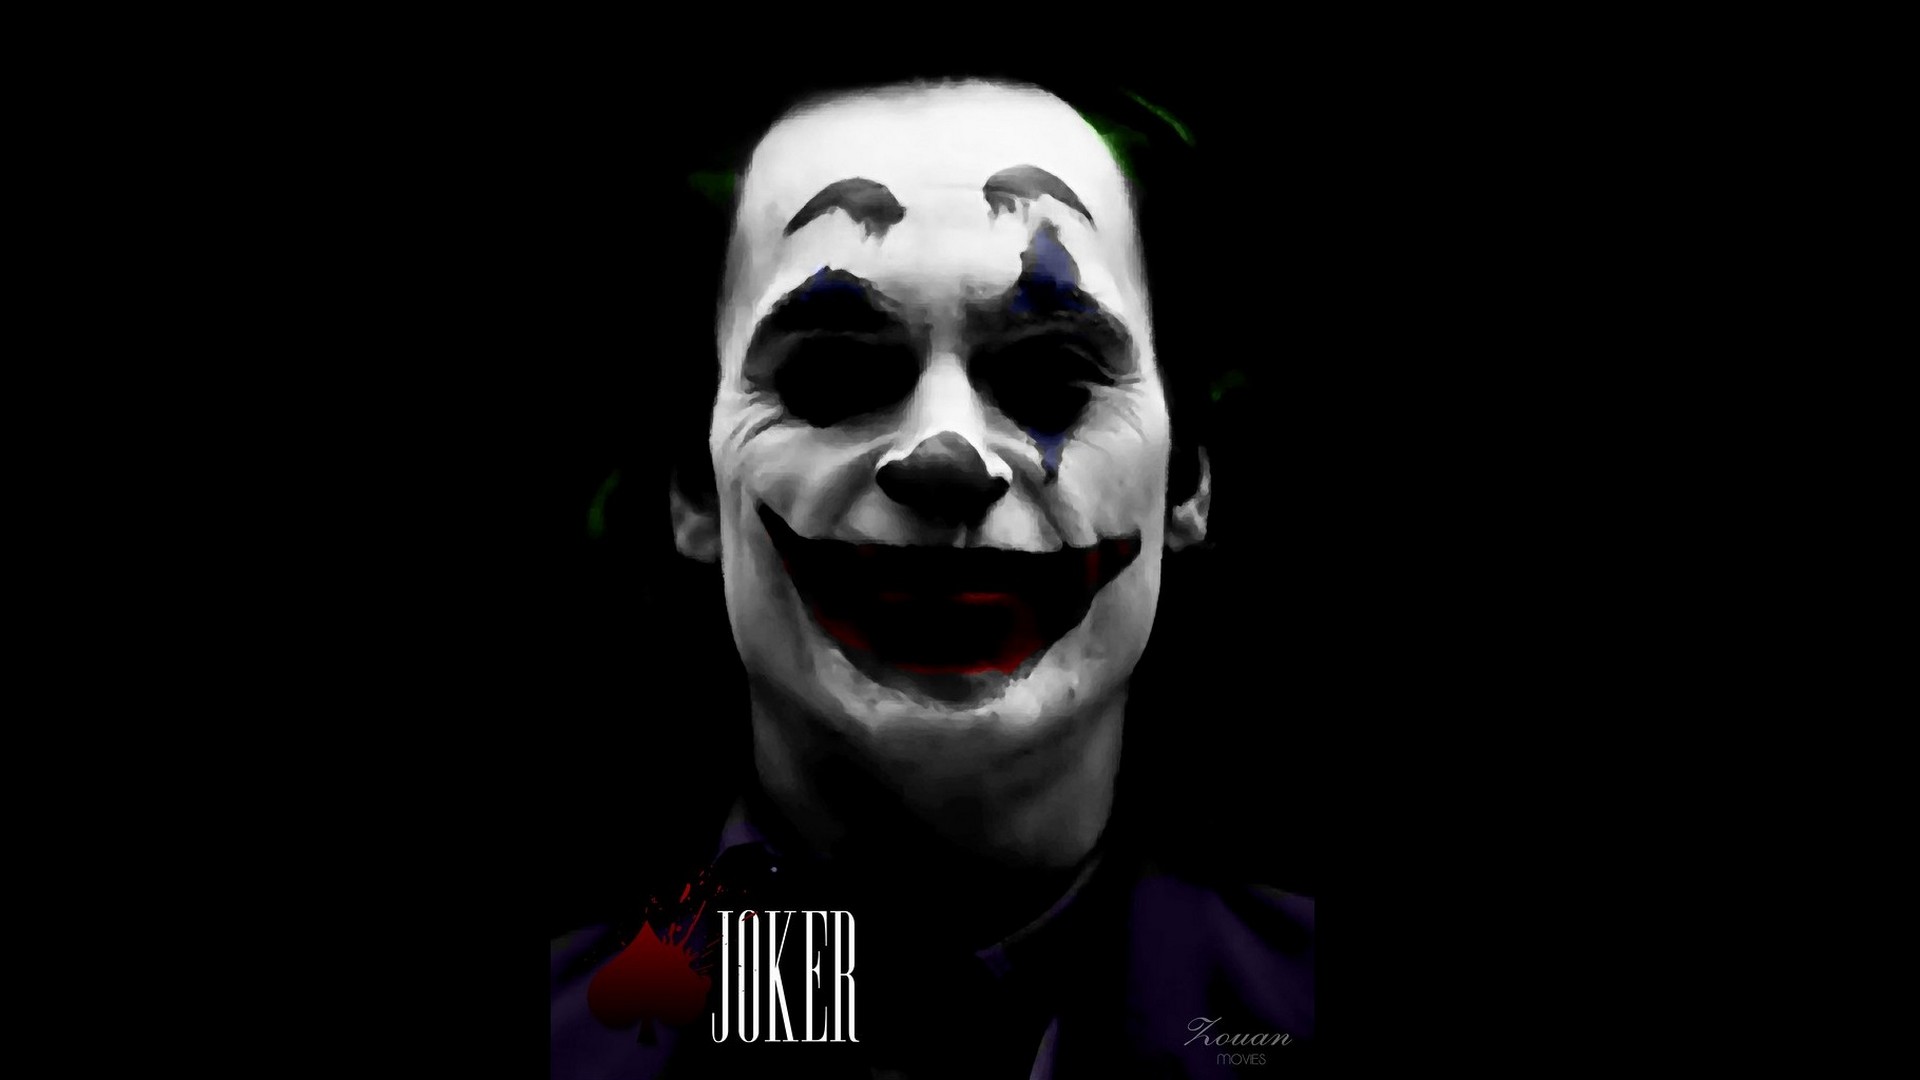 Joker 2019 Wallpaper HD with high-resolution 1920x1080 pixel. You can use this poster wallpaper for your Desktop Computers, Mac Screensavers, Windows Backgrounds, iPhone Wallpapers, Tablet or Android Lock screen and another Mobile device